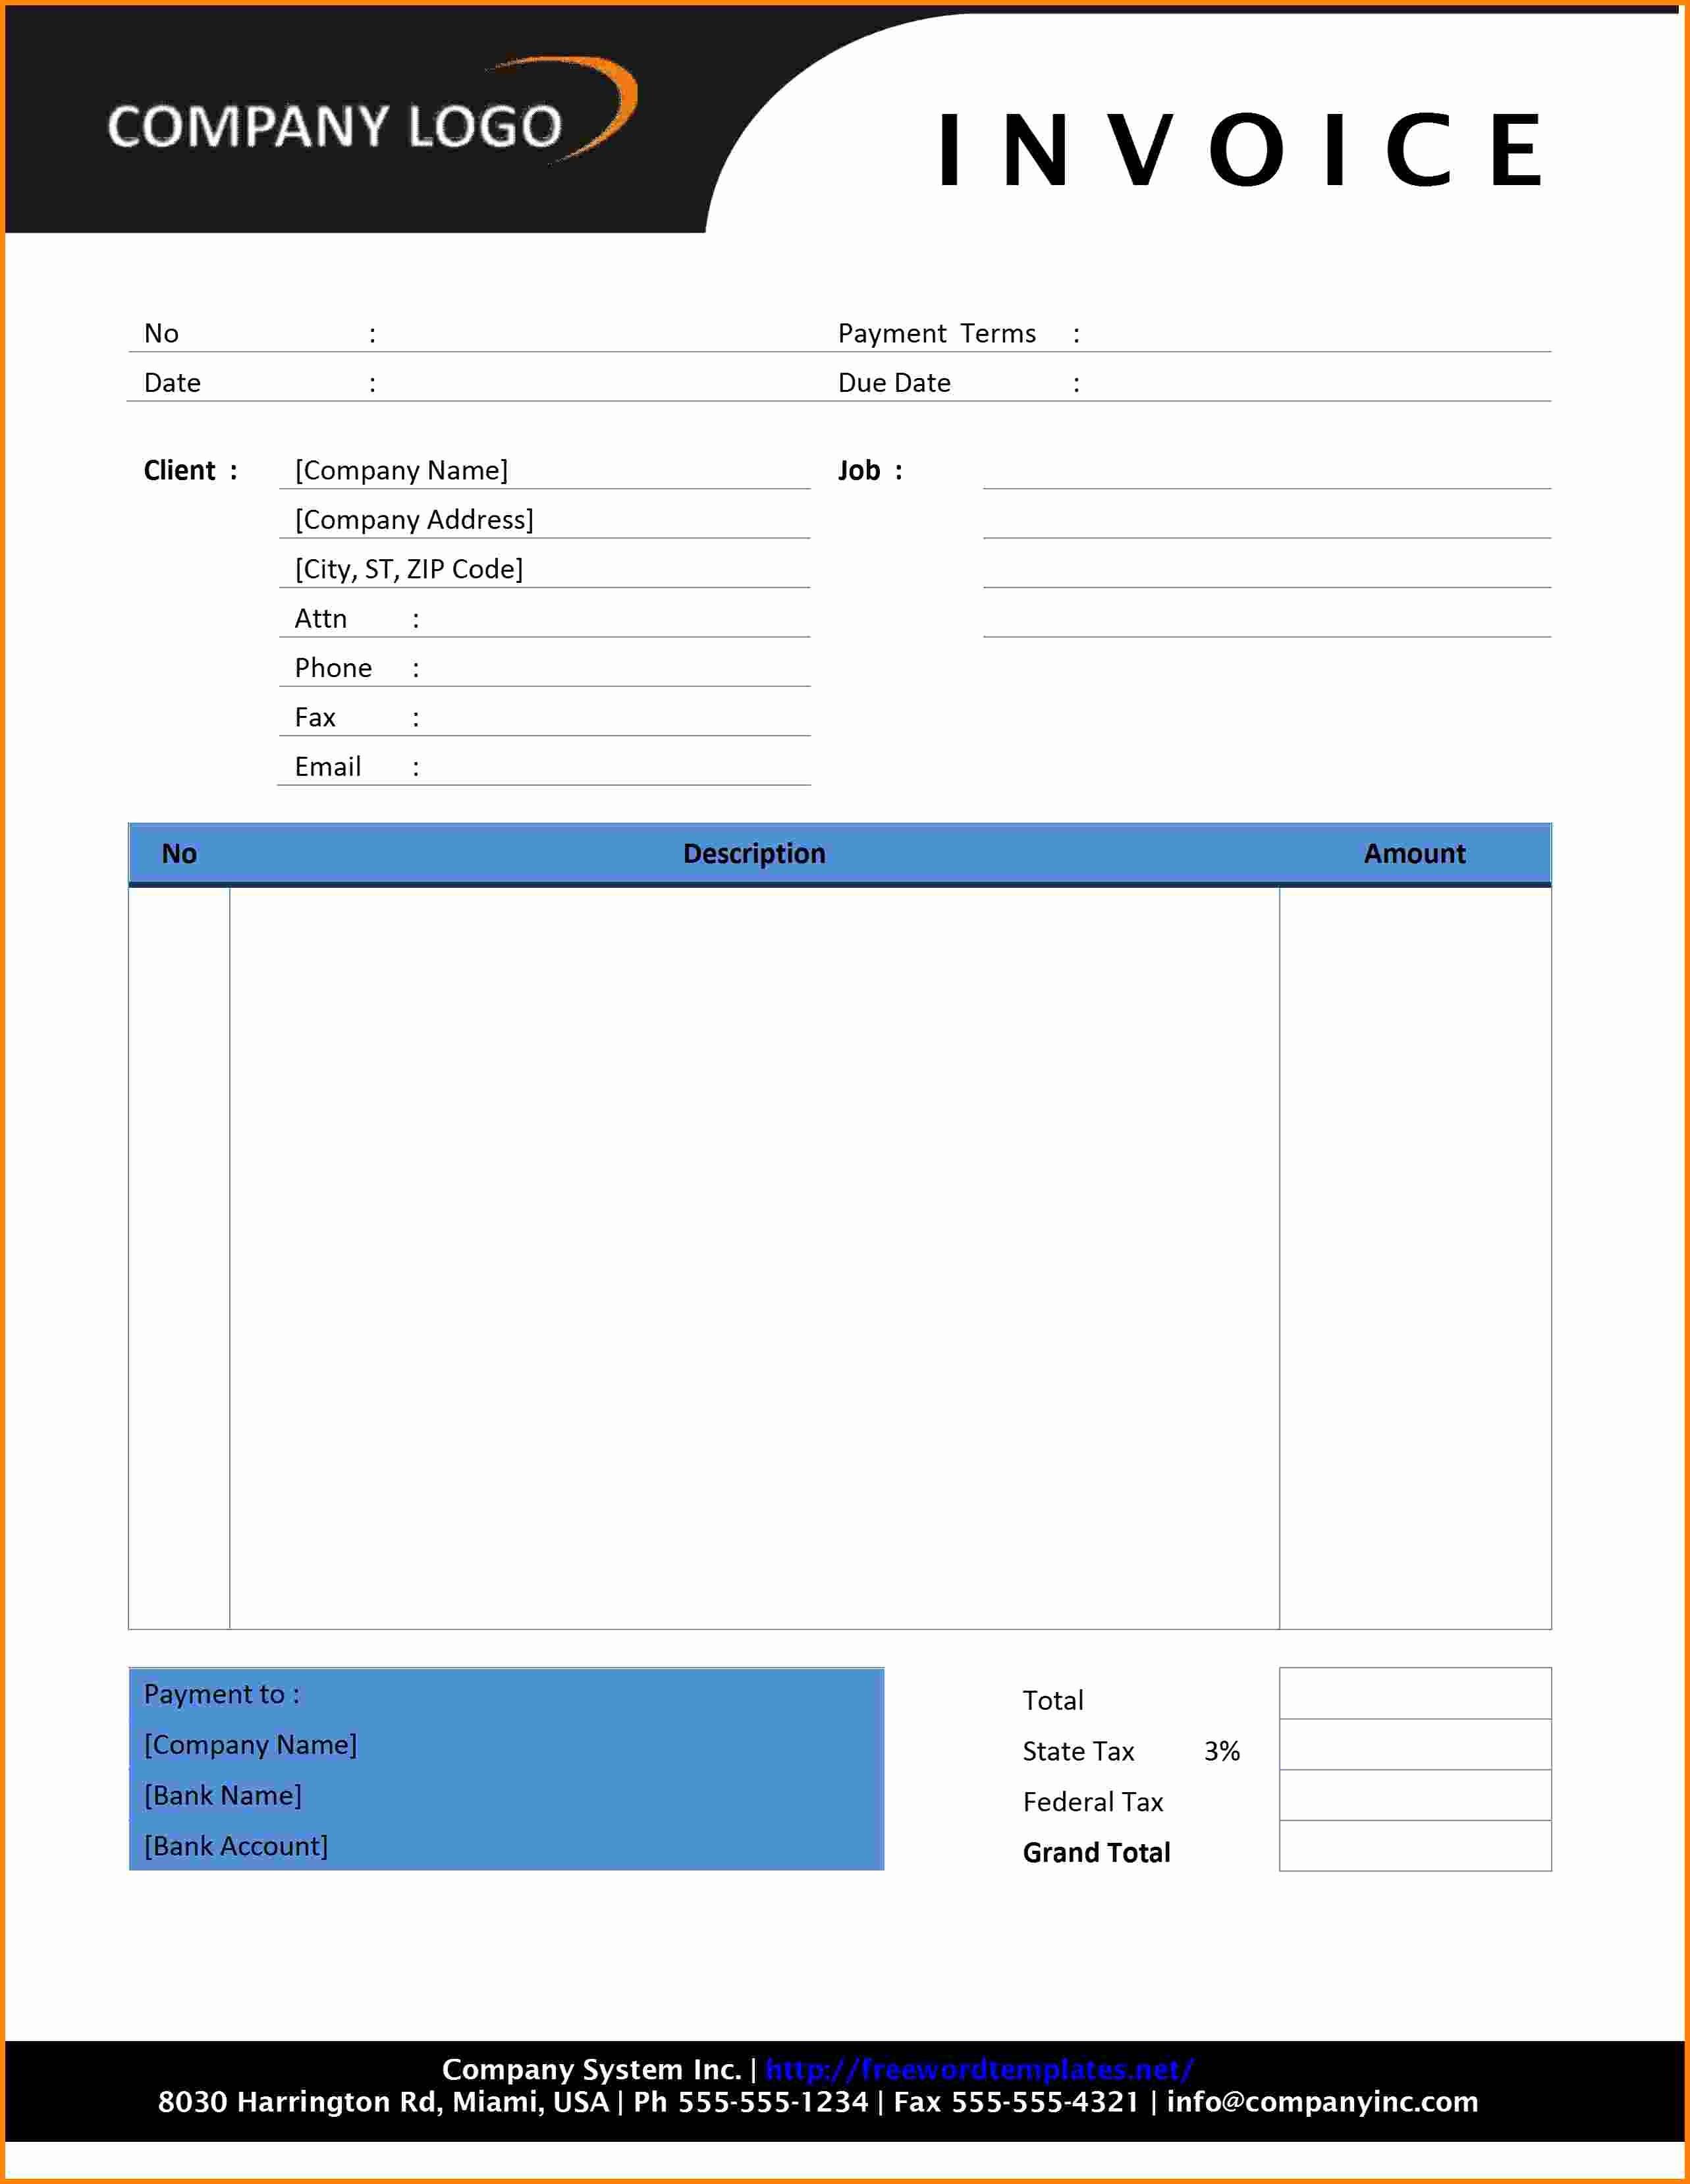 Invoice Template for Microsoft Word Fresh 8 Invoice Template Word 2003